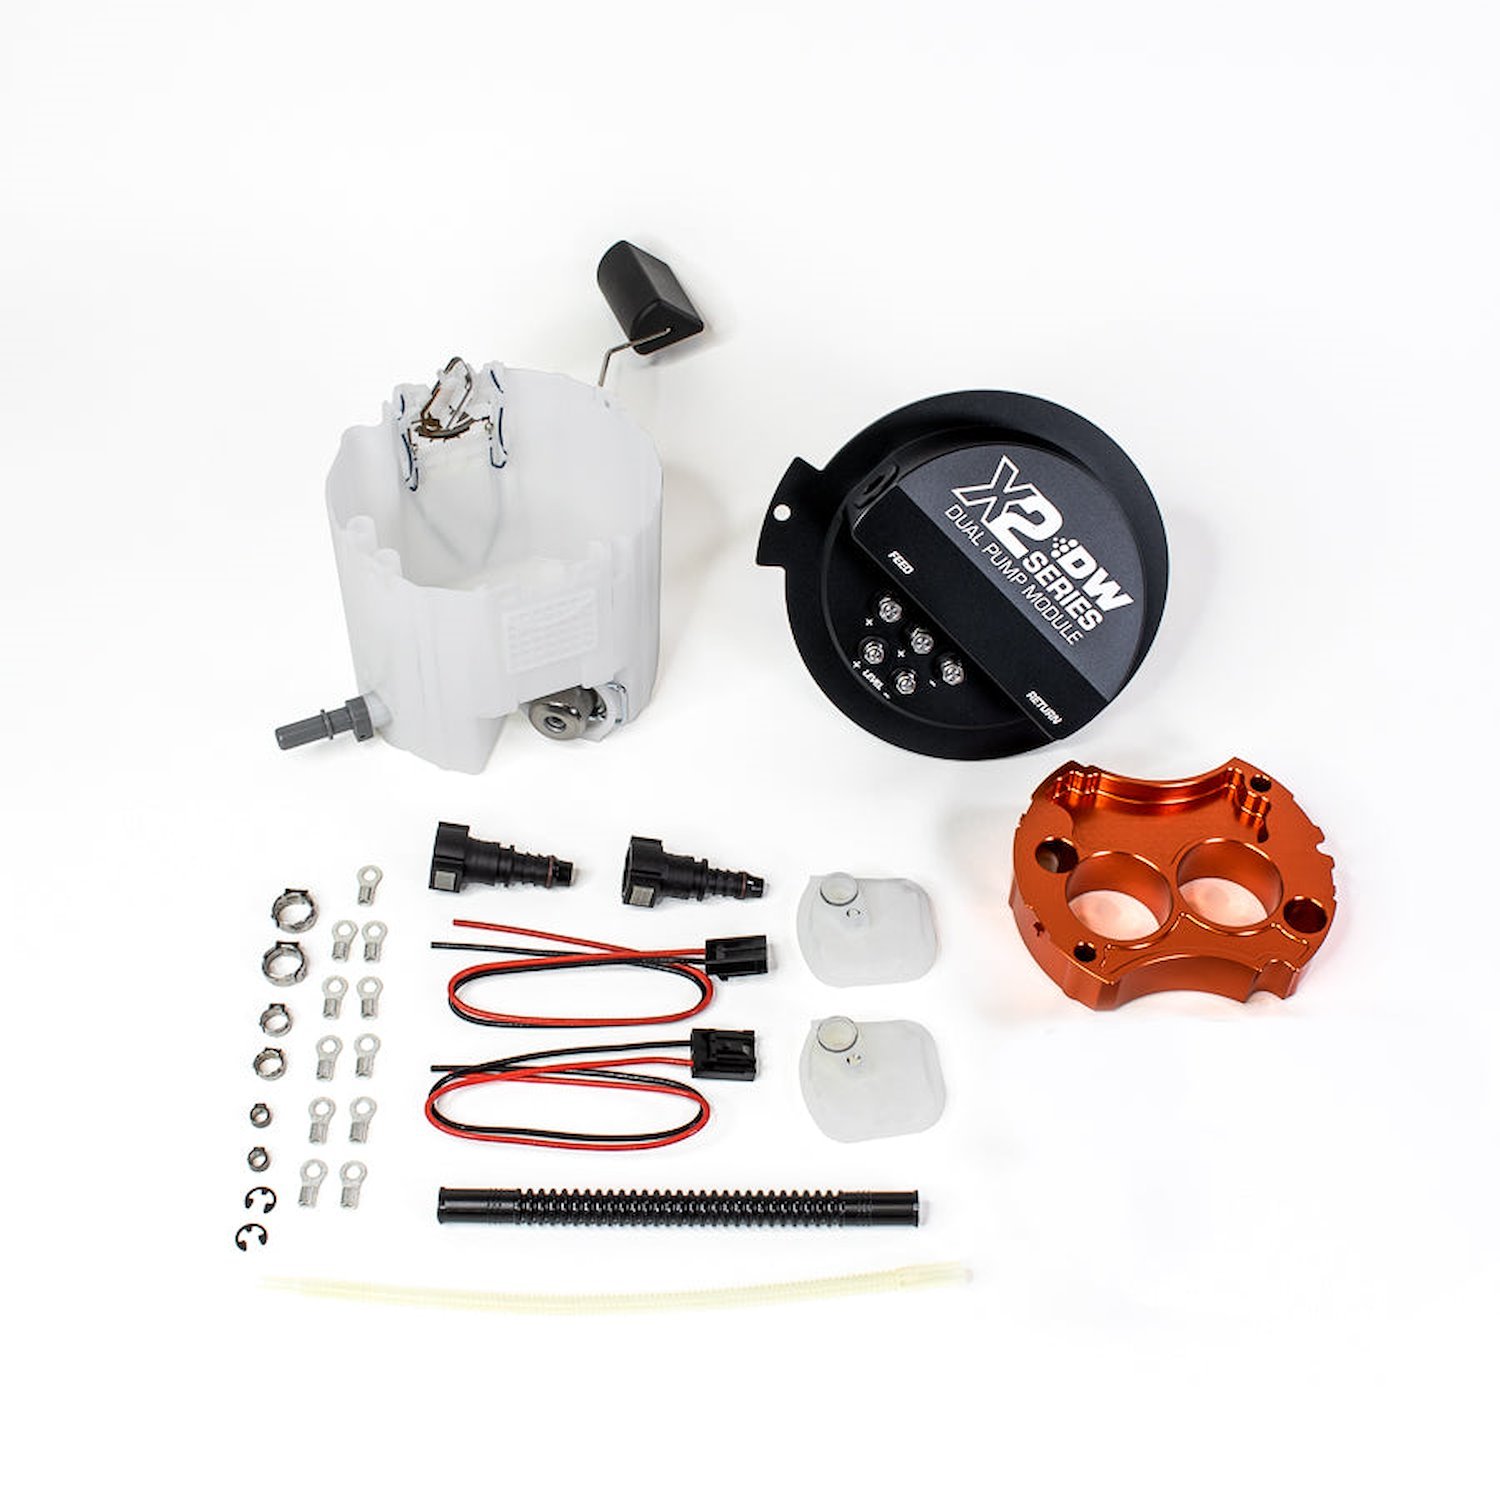 90007002 X2 Series Fuel Pump Module for 2010-15 Camaro LS 3.7 V6/SS LS3 6.2 and 2010-14 CTS-V